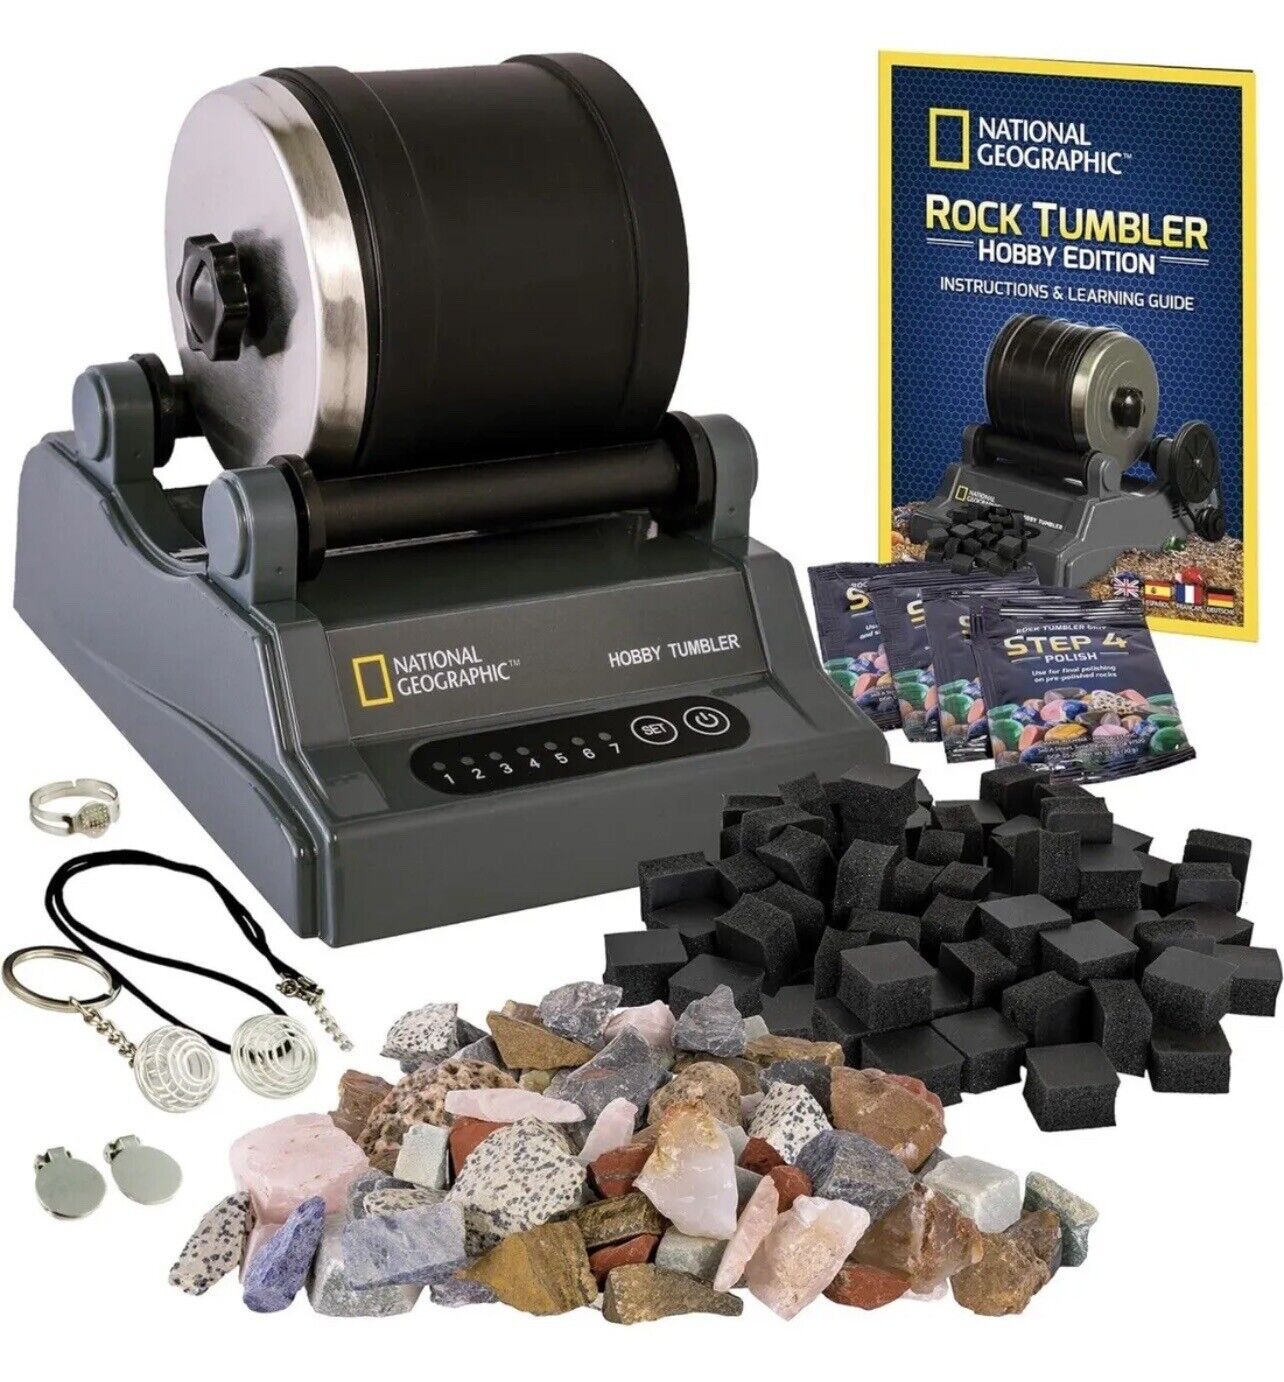 NATIONAL GEOGRAPHIC Rock Tumbler Kit – Hobby Edition Includes Rough Gemstones